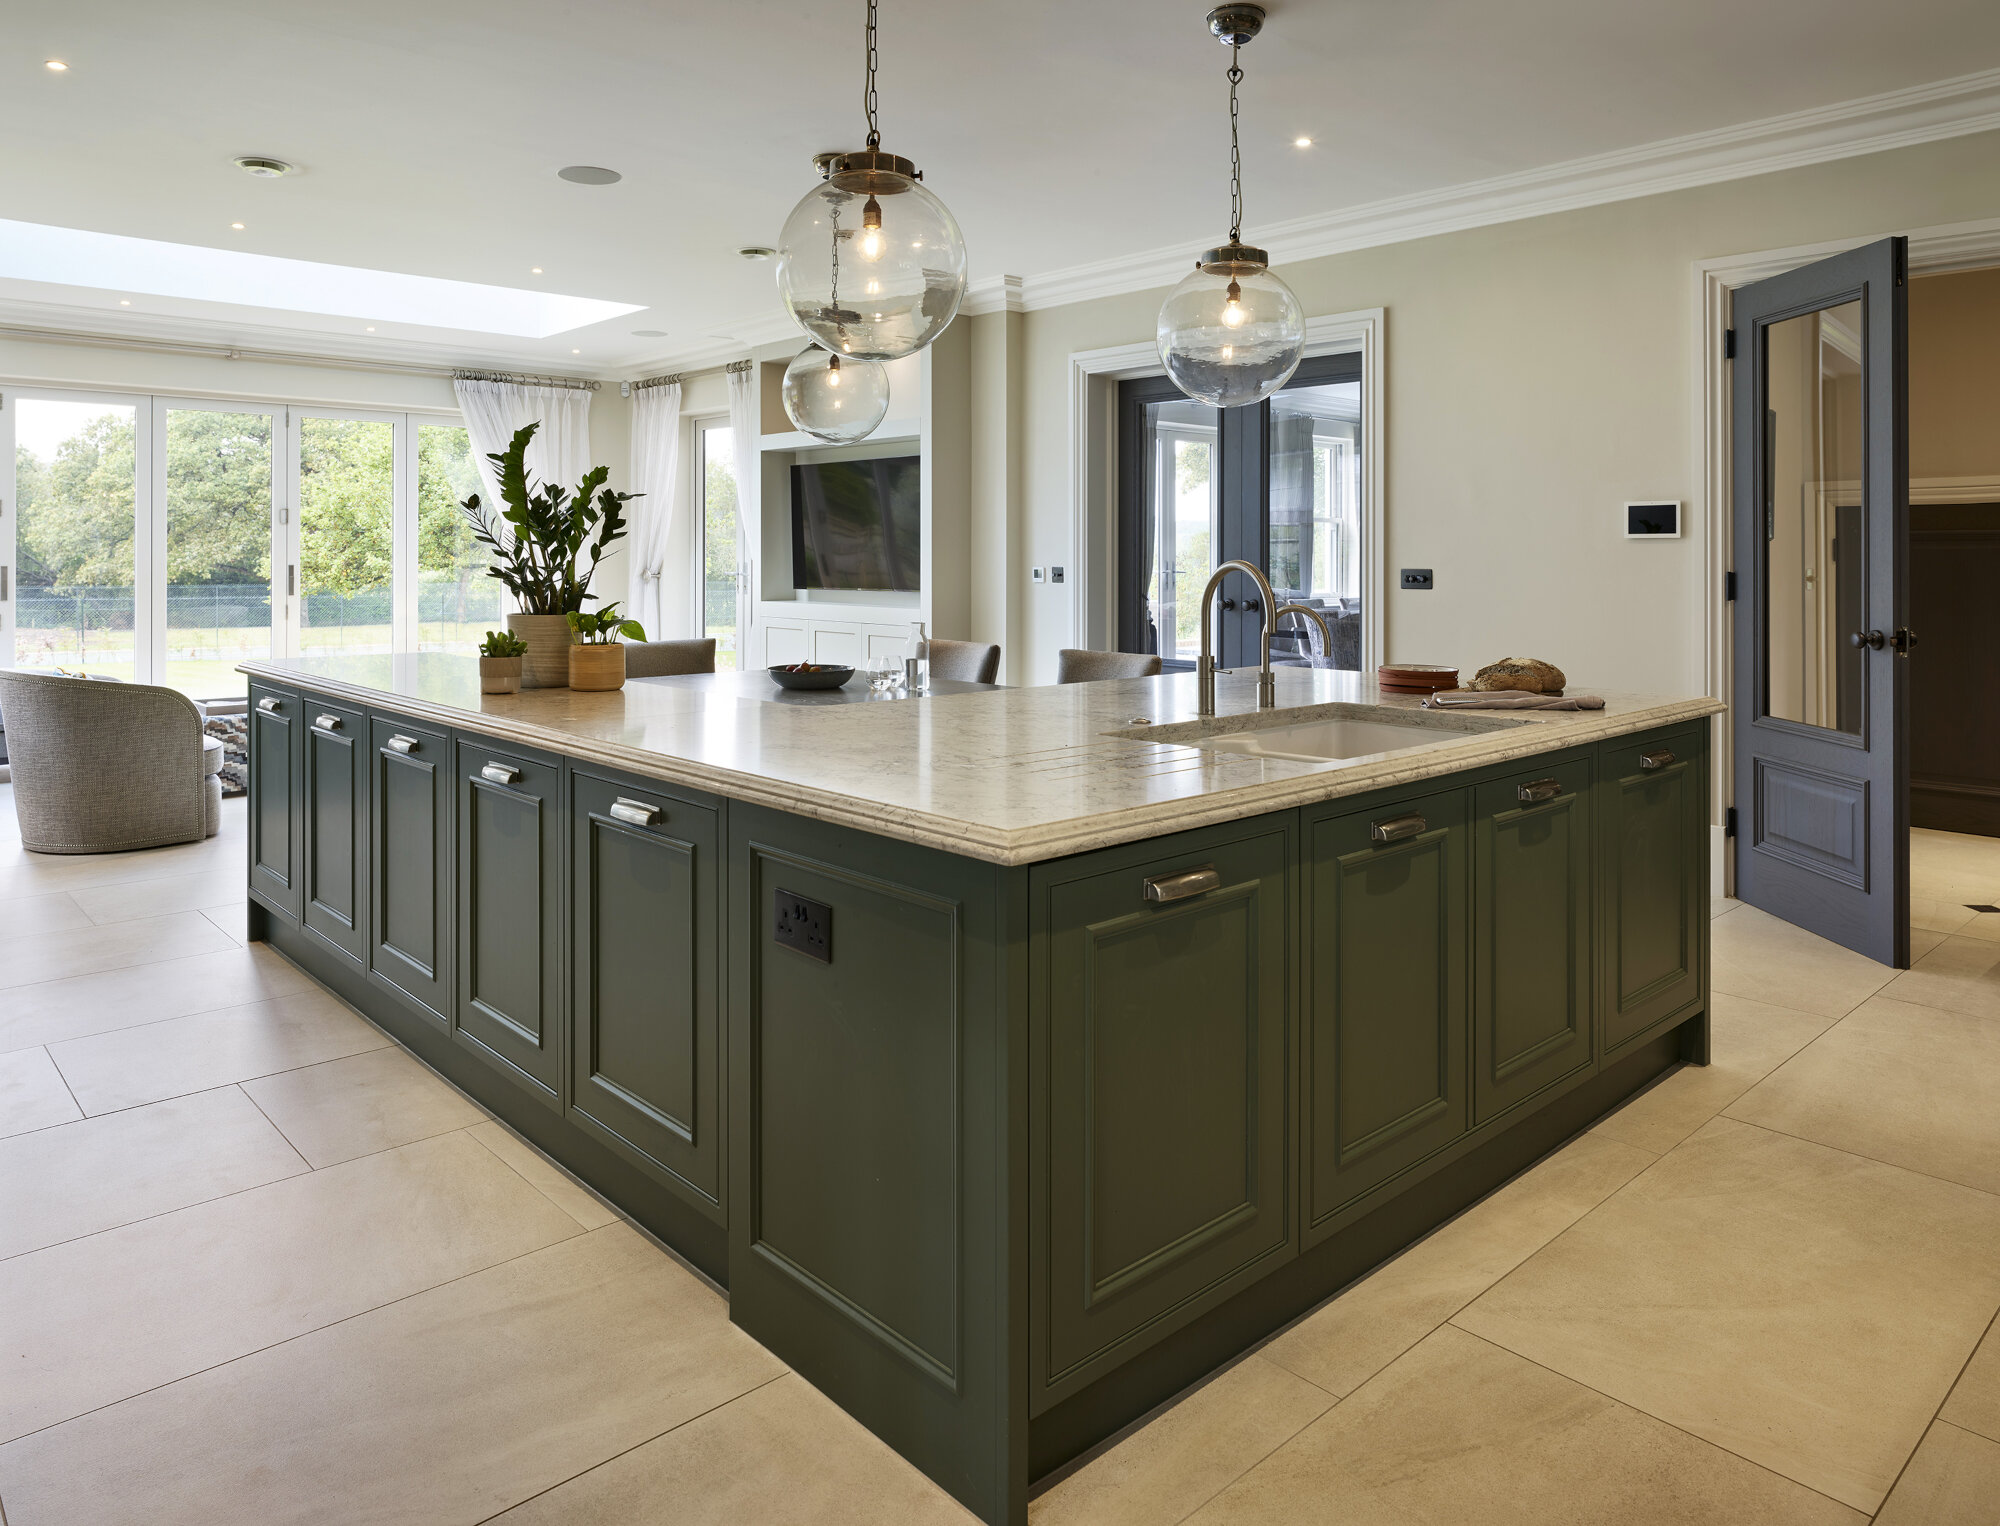 High End traditional Kitchens In Chapel-en-le-Frith